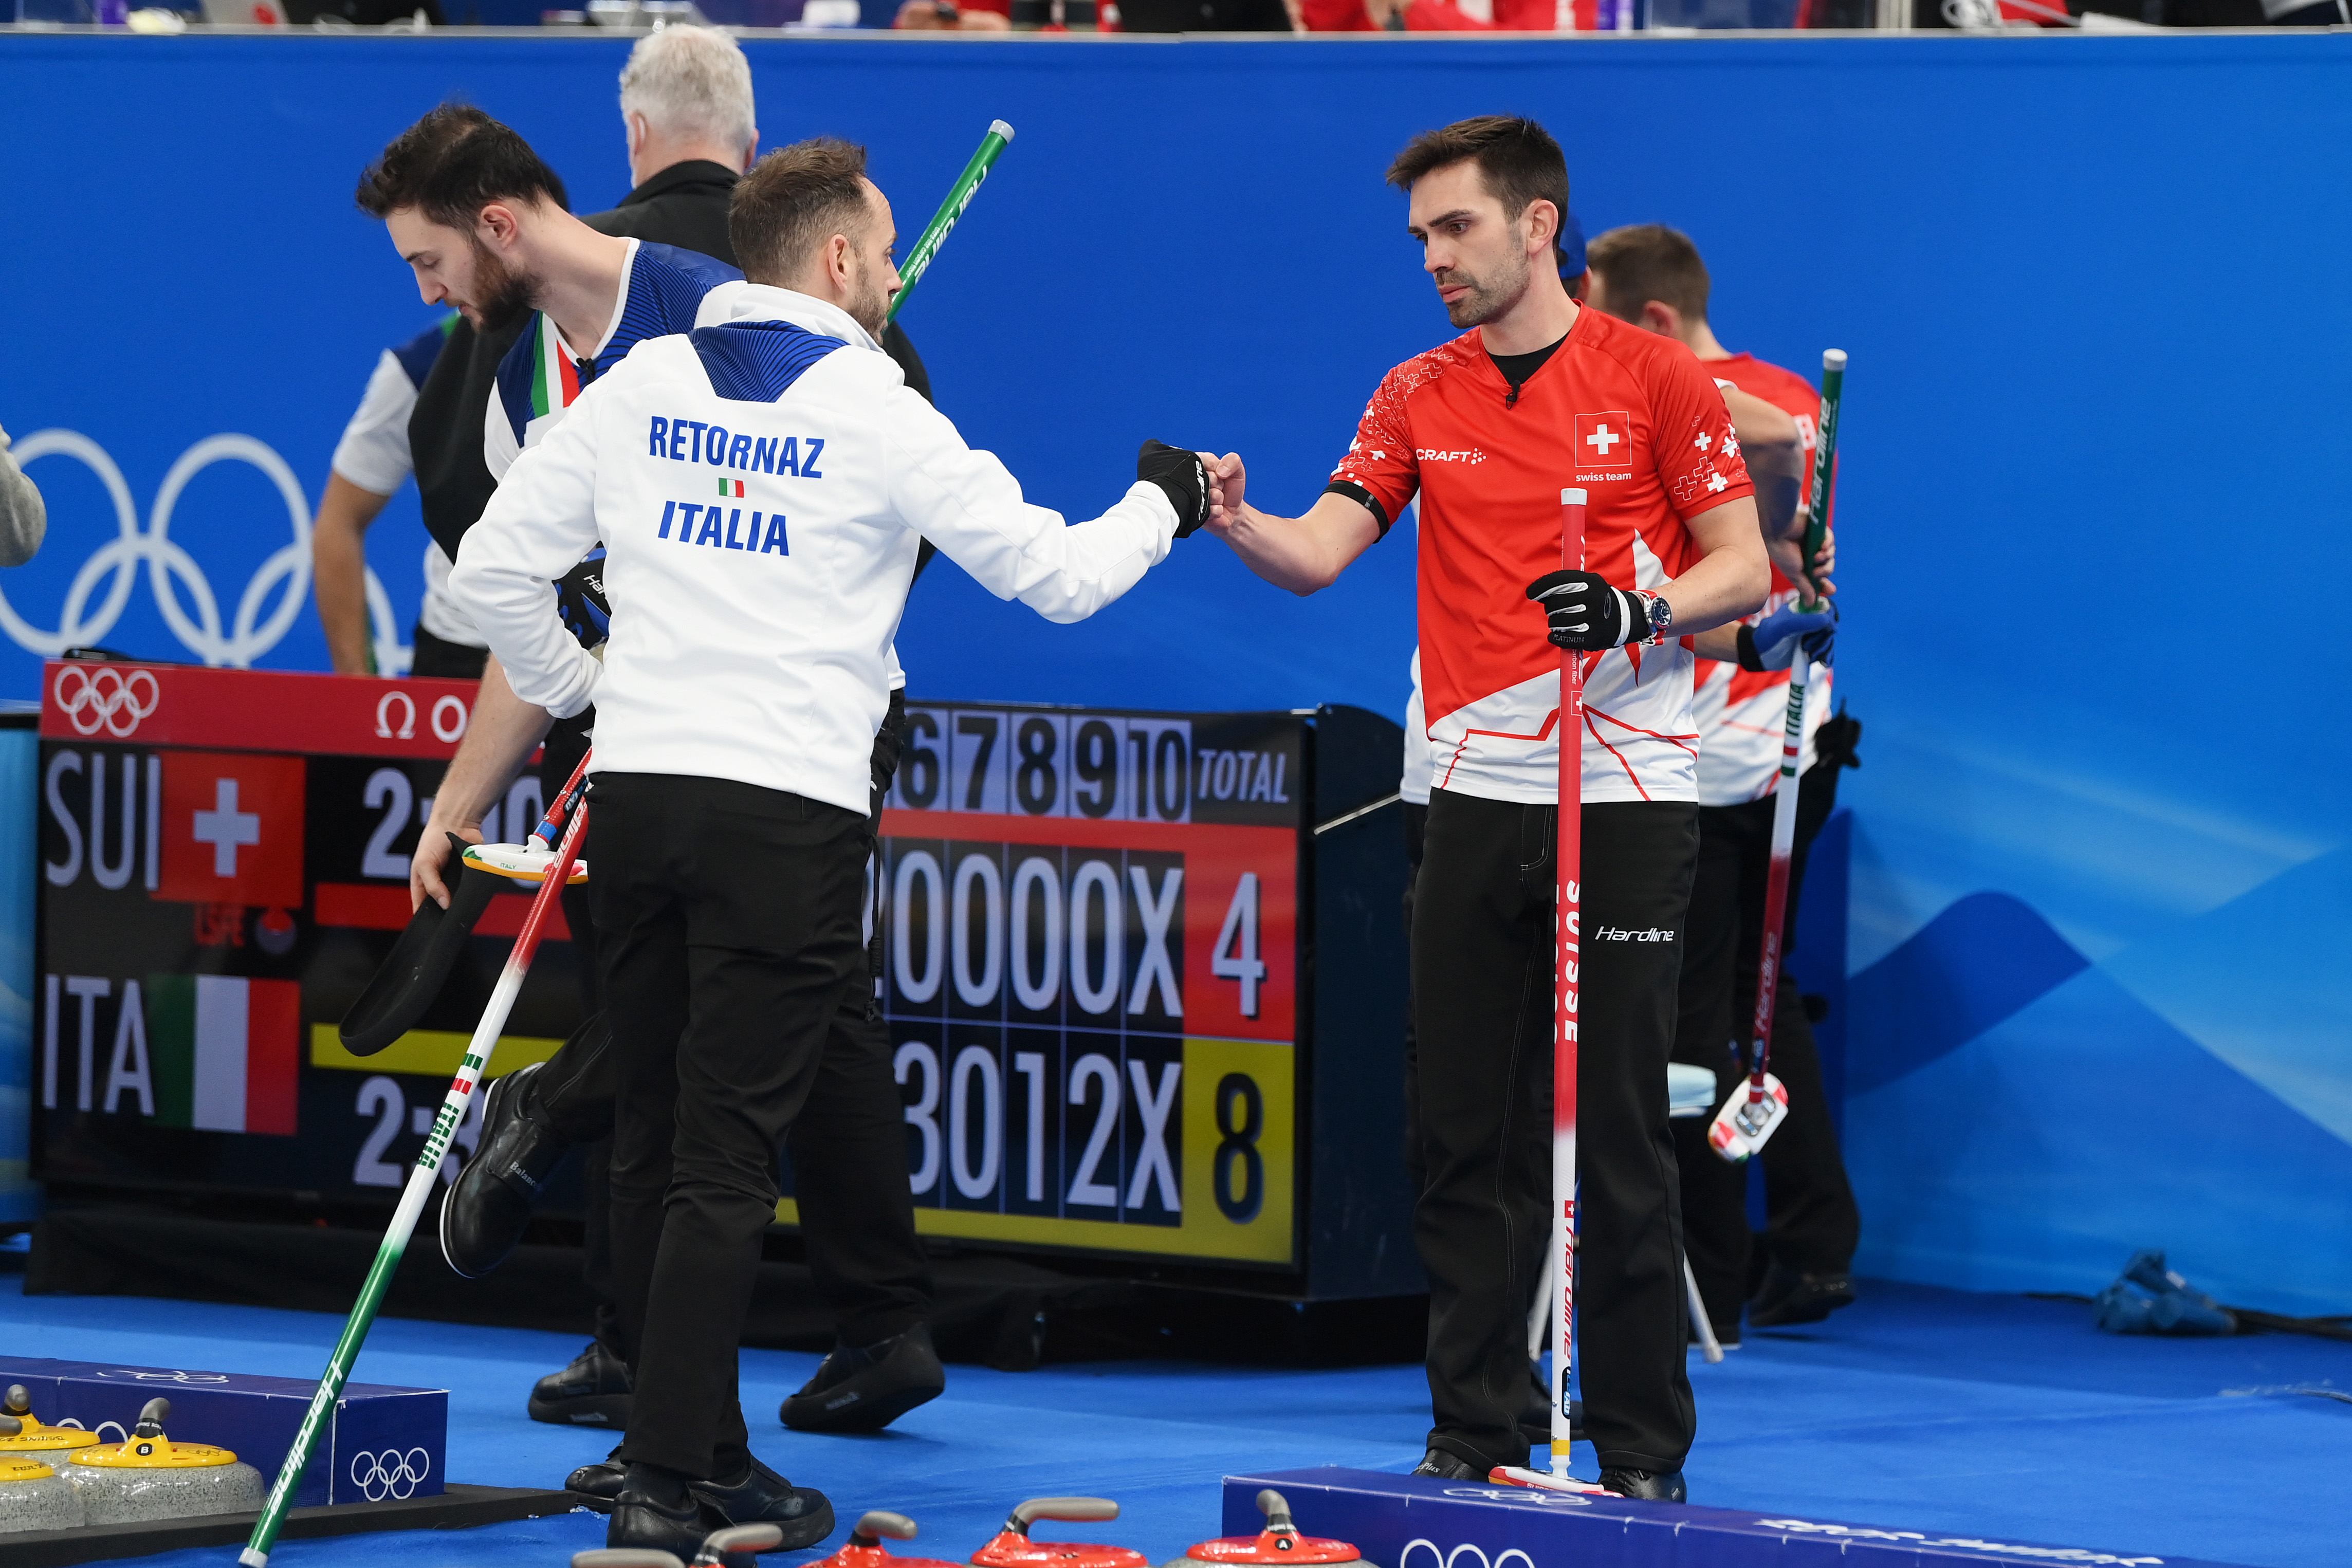 Joel Retornaz of Team Italy interacts with Peter De Cruz of Team Switzerland following their sides victory during the Men’s Curling Round Robin Session 7 on Day 9 of the Beijing 2022 Winter Olympic Games at National Aquatics Centre on February 13, 2022 in Beijing, China.